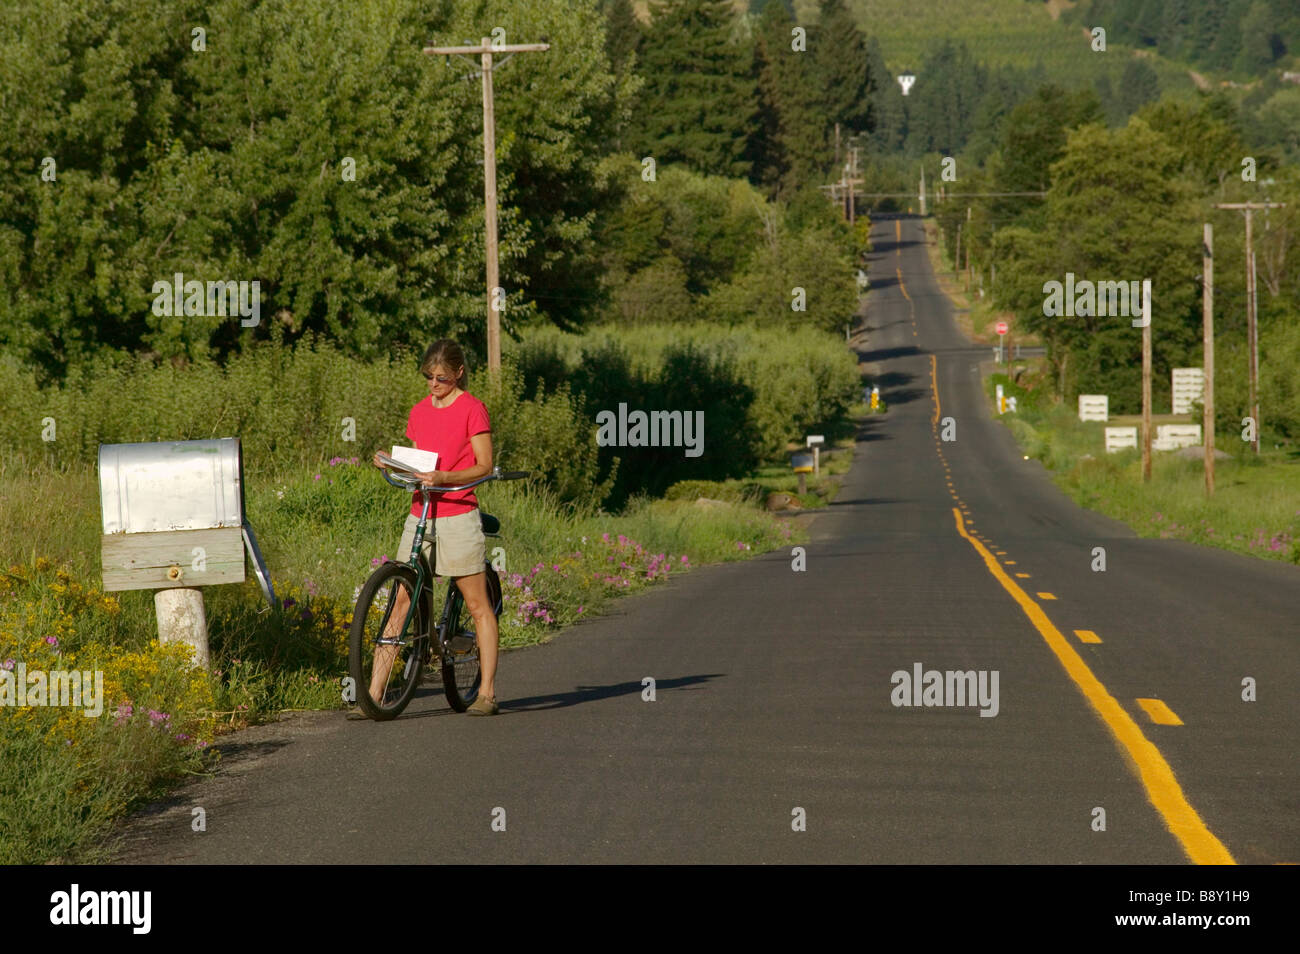 Woman reading a mail by a country mailbox while riding a bicycle, Parkdale, Hood River County, Oregon, USA Stock Photo